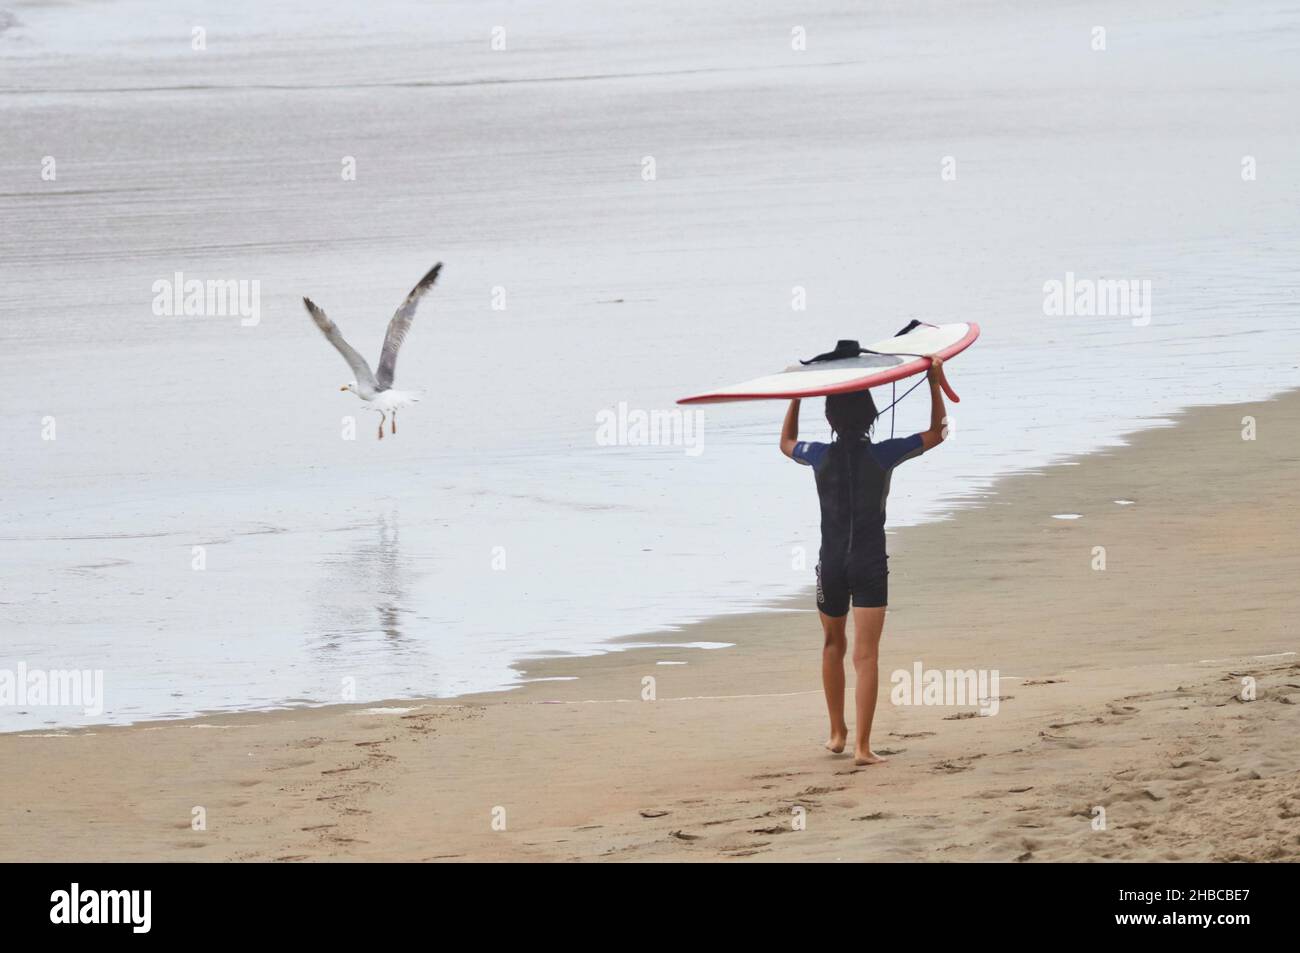 Child surfer with a longboard on his head at the seashore at the XIII Salinas International Longboard Festival 2014 (Asturias, Cantabrian sea, Spain) Stock Photo